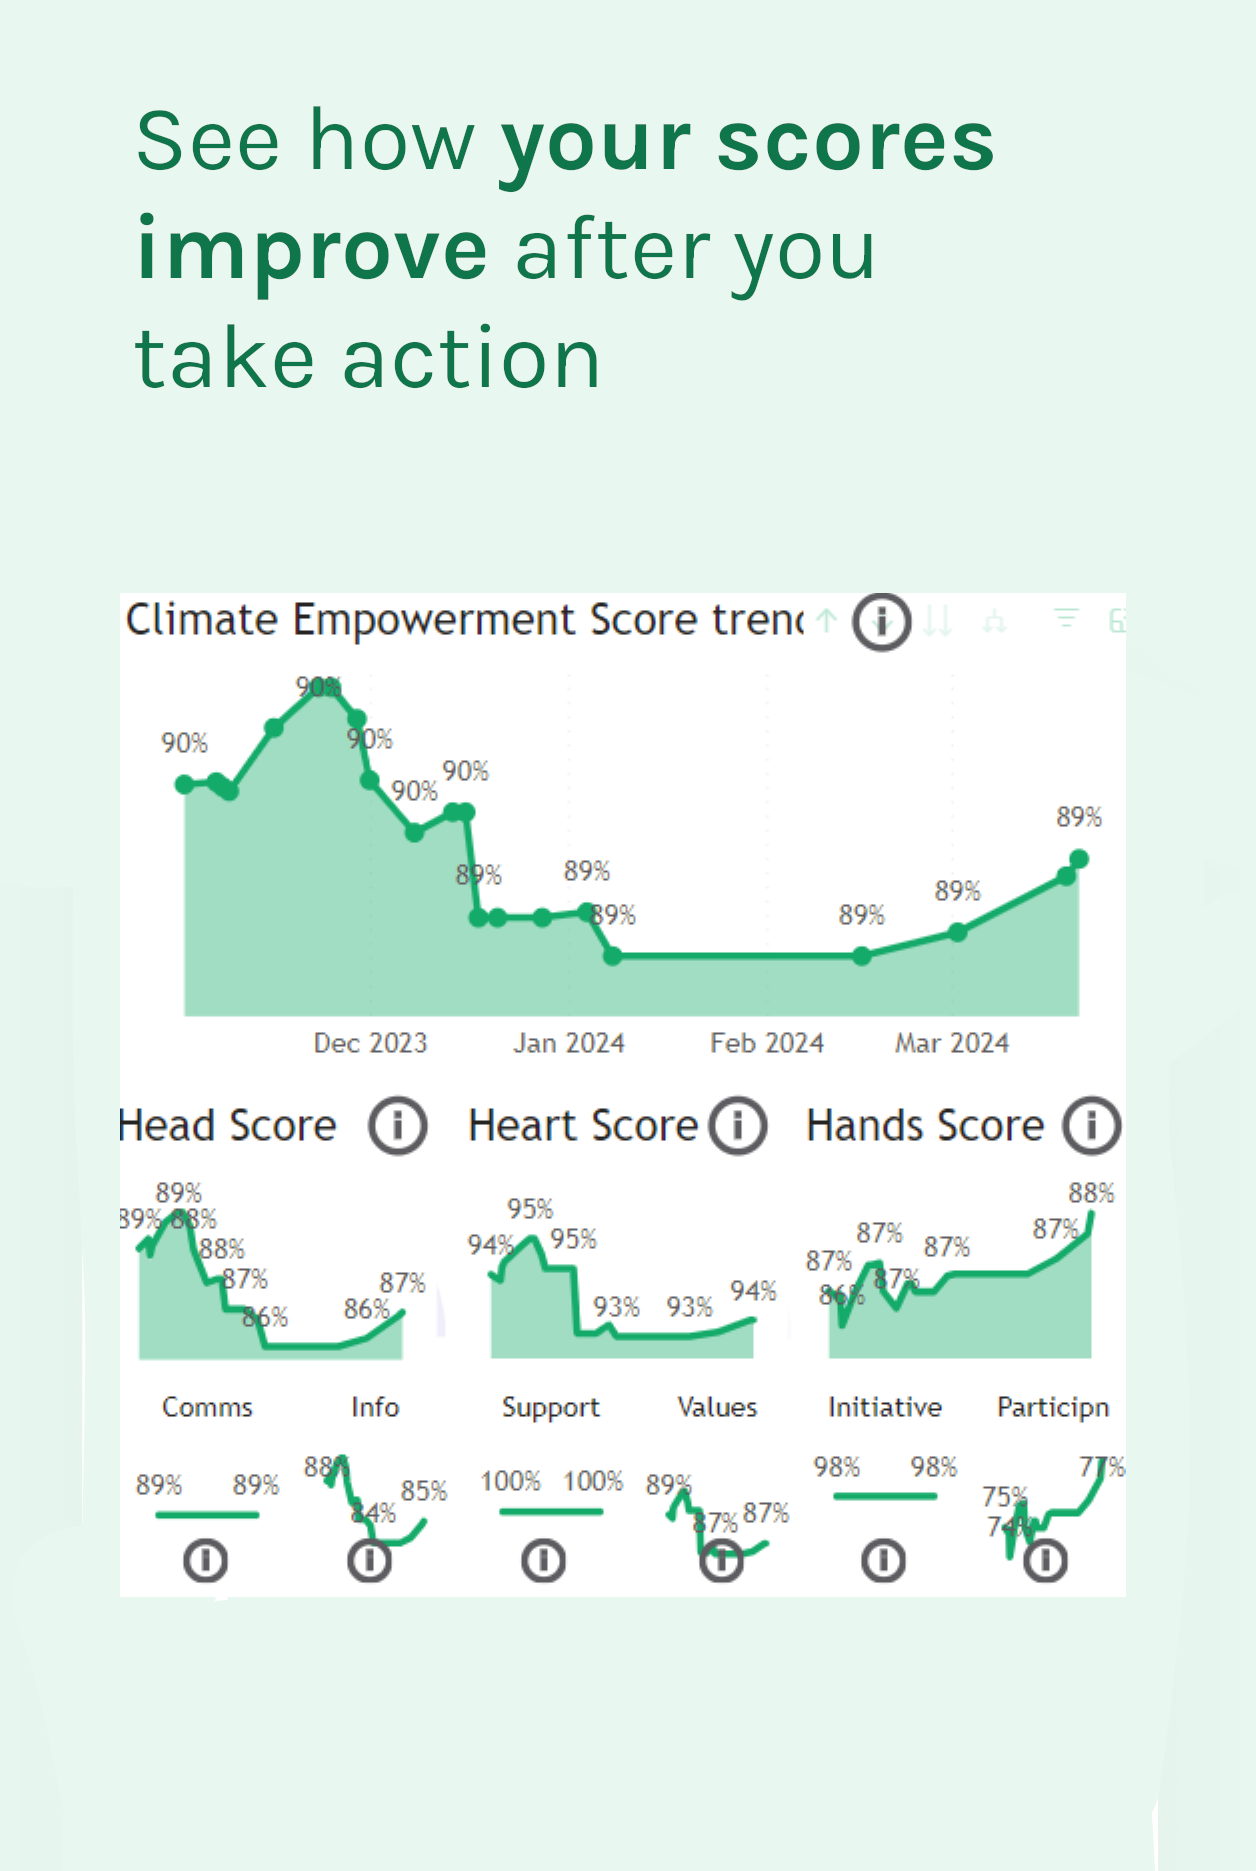 See how your scores improve after you take action